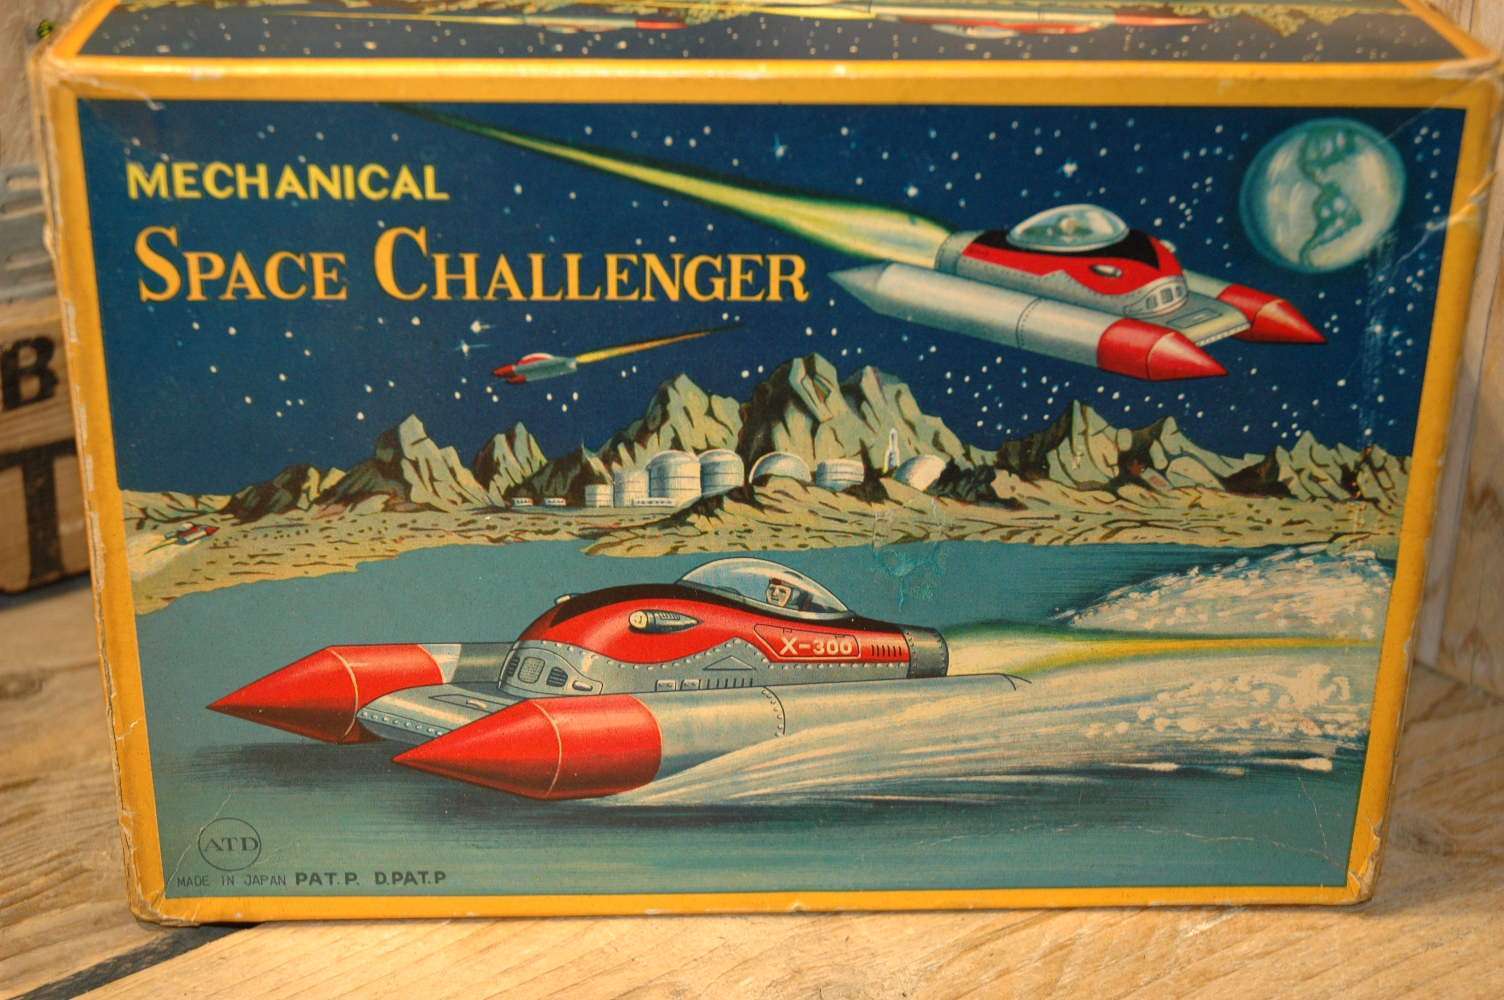 ATD - Space Challenger